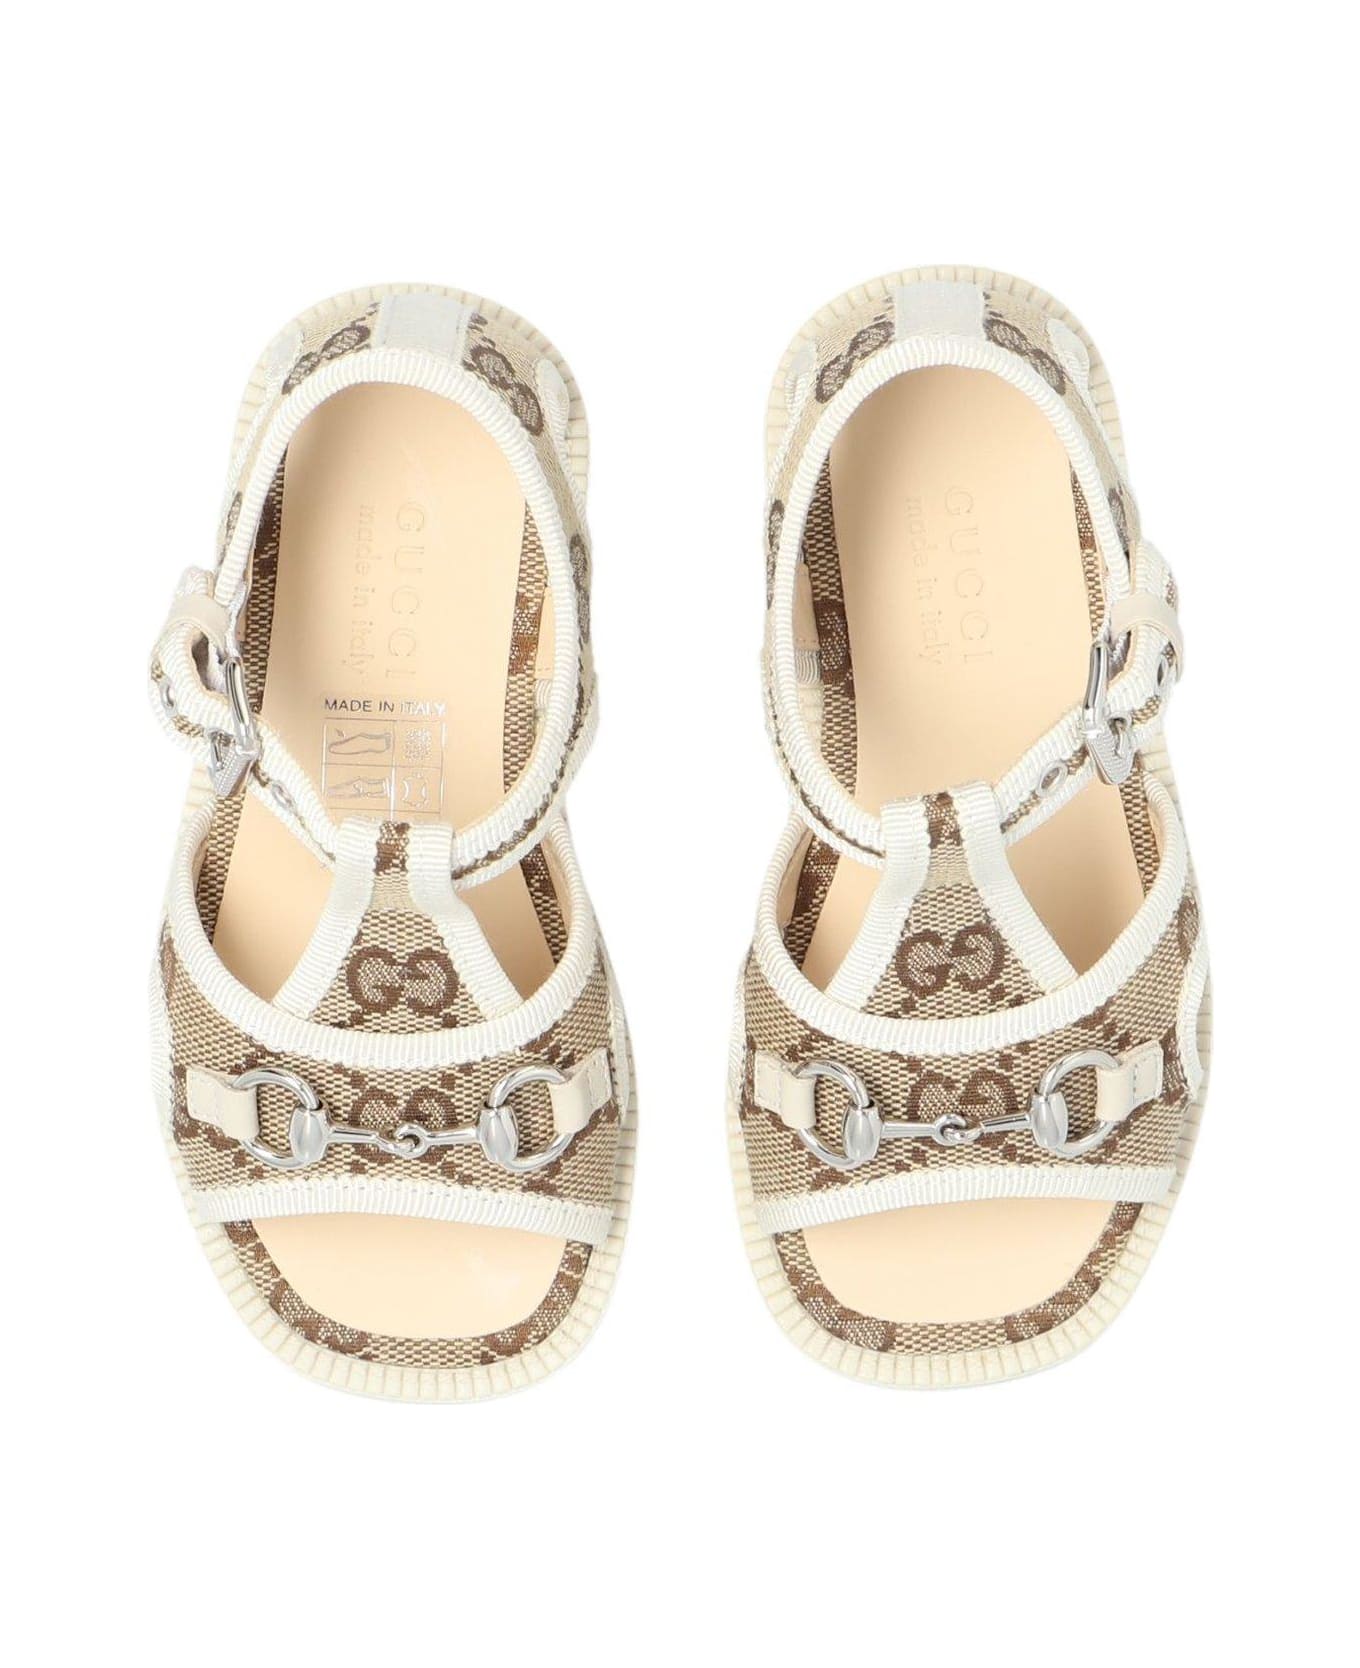 Gucci Buckled Open Toe Sandals - White シューズ